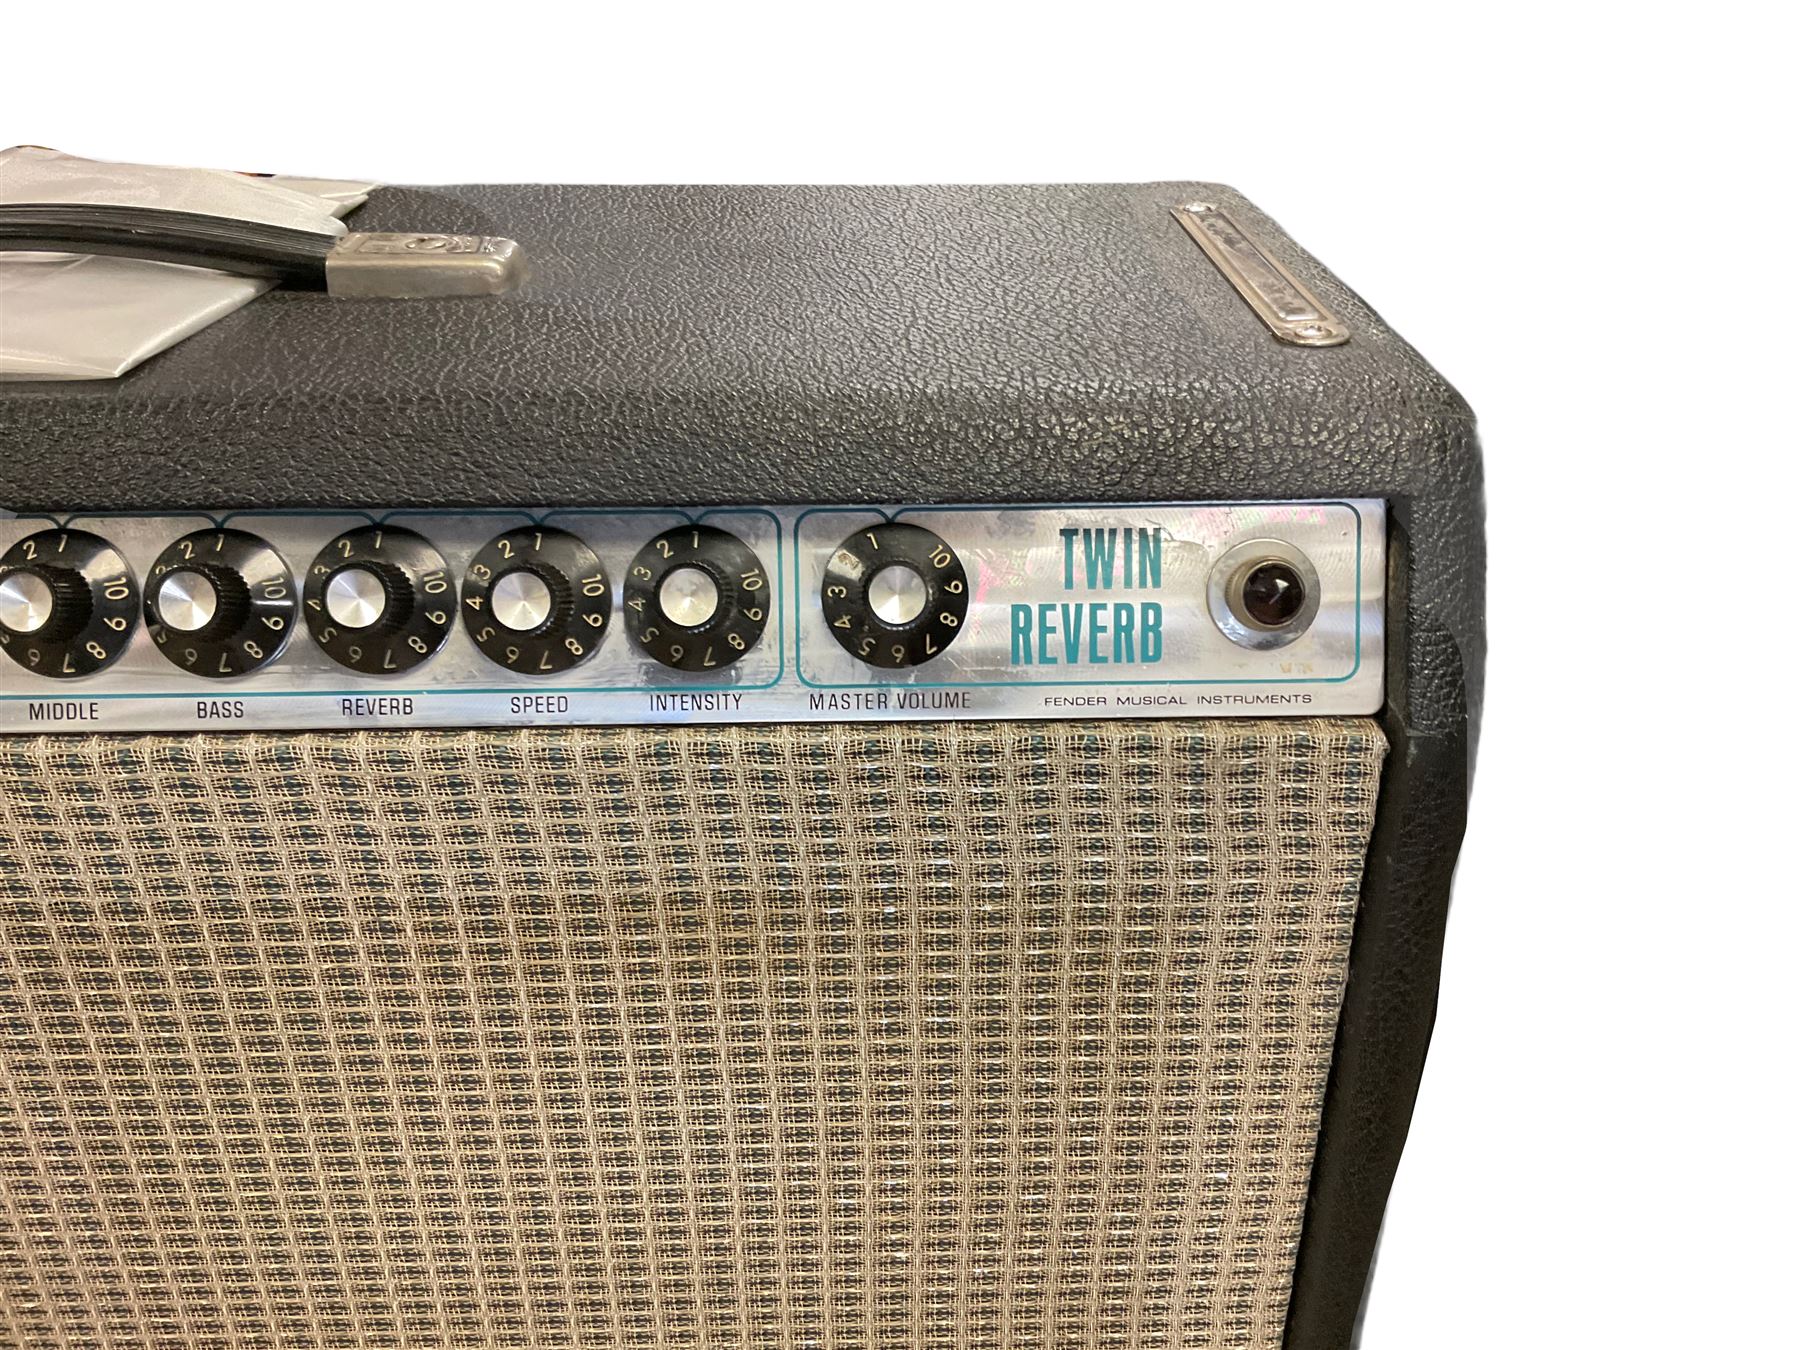 1970s Fender Twin Reverb professional amplifier No.A66744 - Image 6 of 12